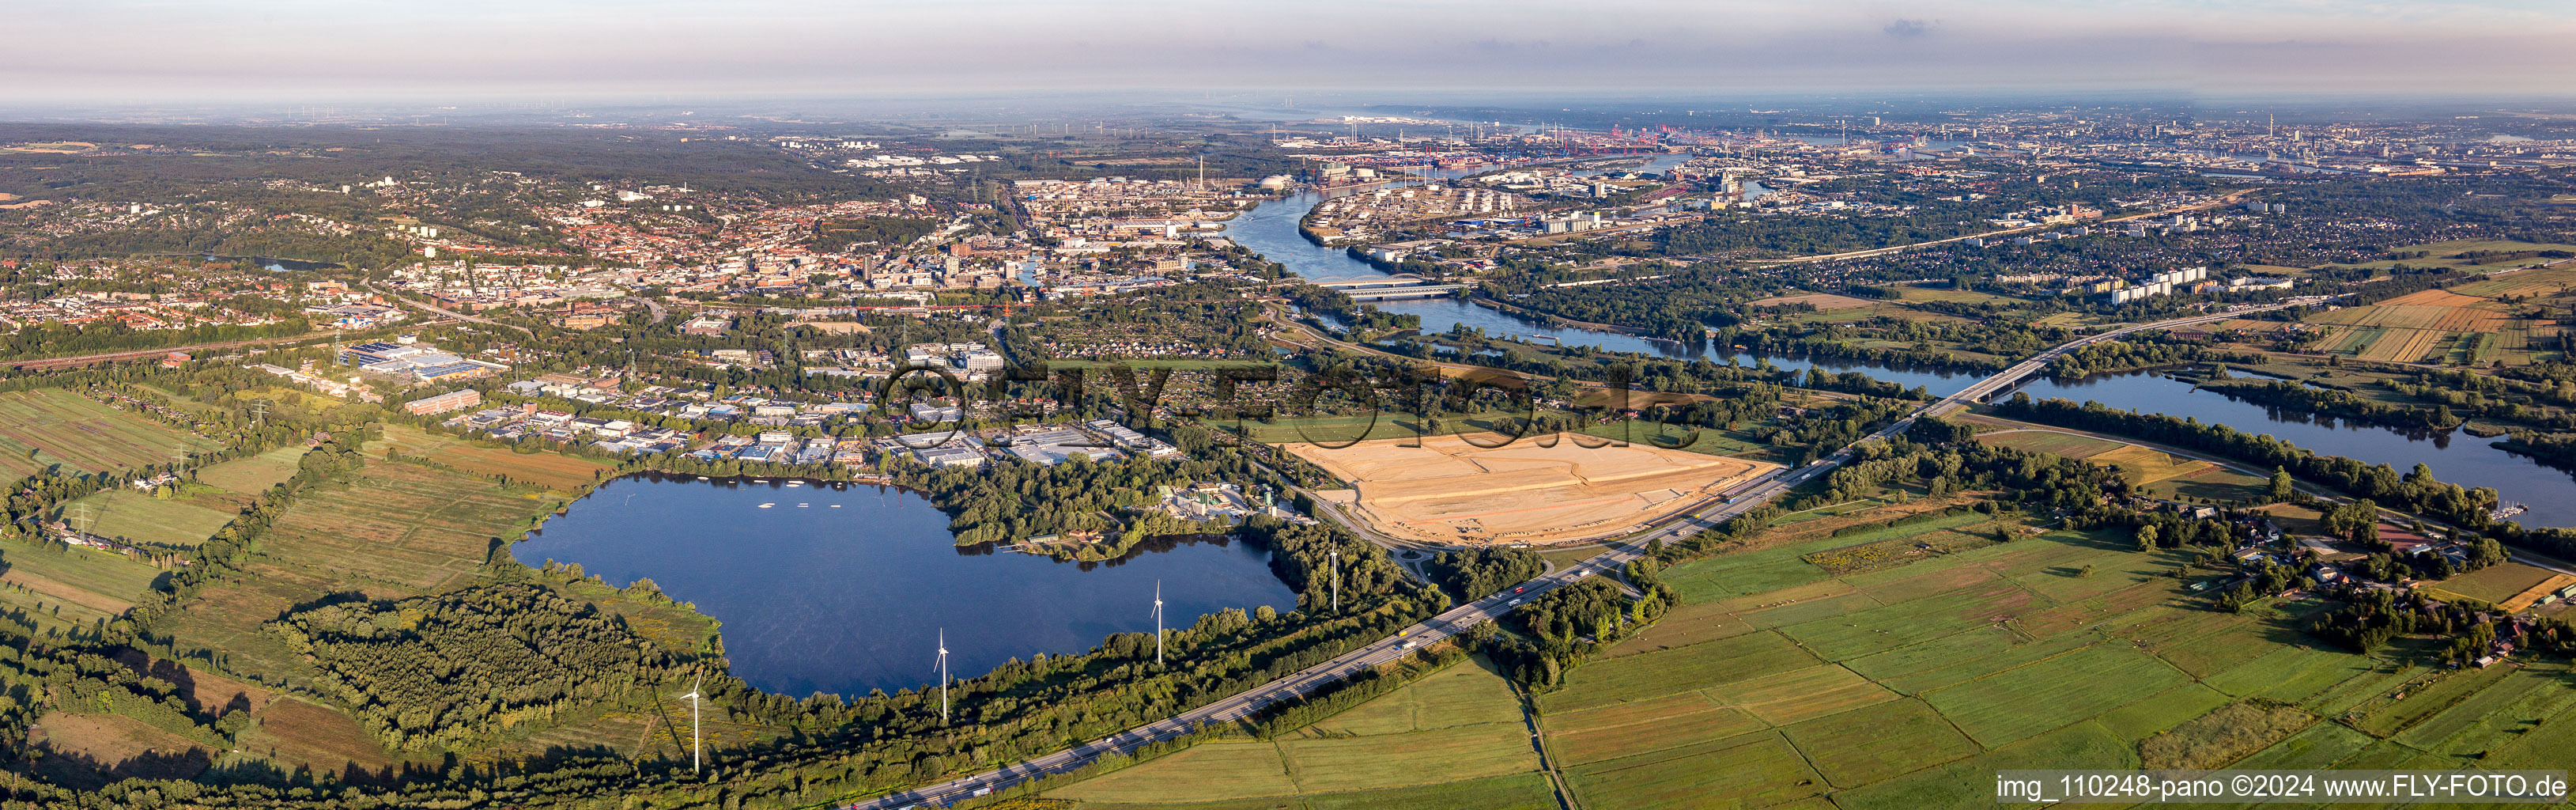 Town on the banks of the river of Southern Elbe in the district Harburg in Hamburg, Germany